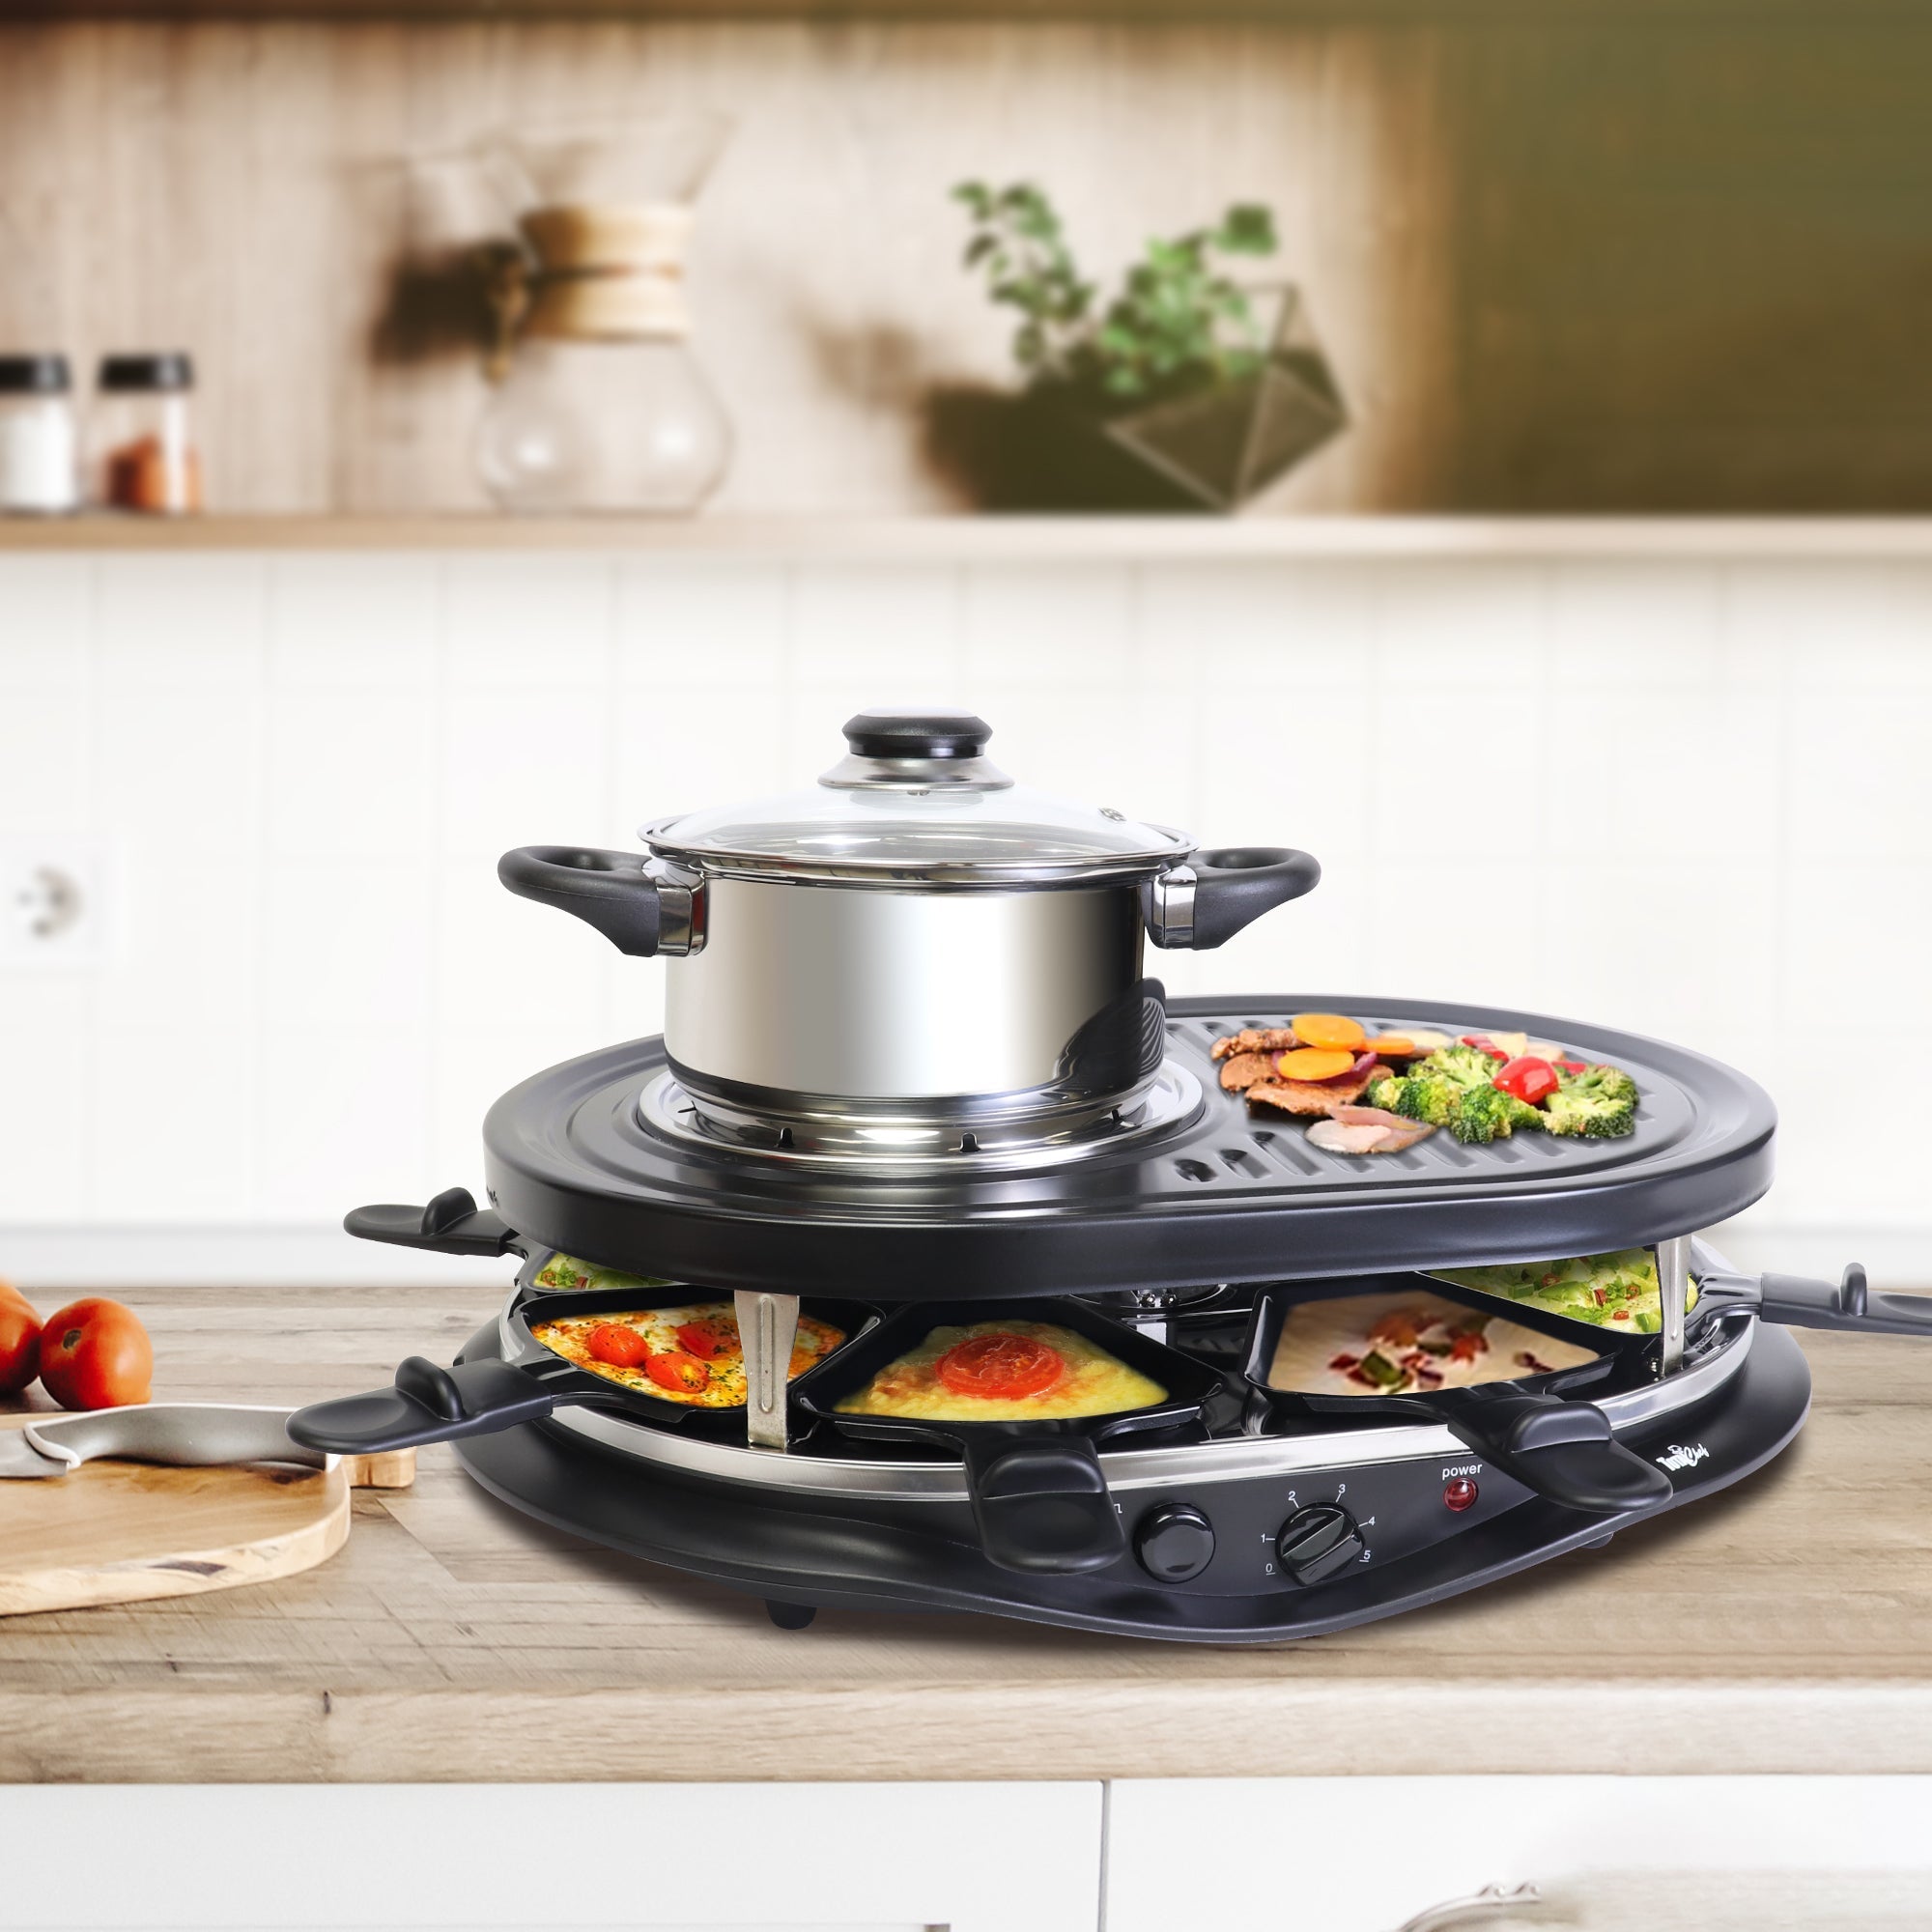 Product shot of raclette and fondue set on white background with various types of food being grilled or warmed, including sausages, broccoli, fried egg, and cheese, plus a plate of meat and vegetables